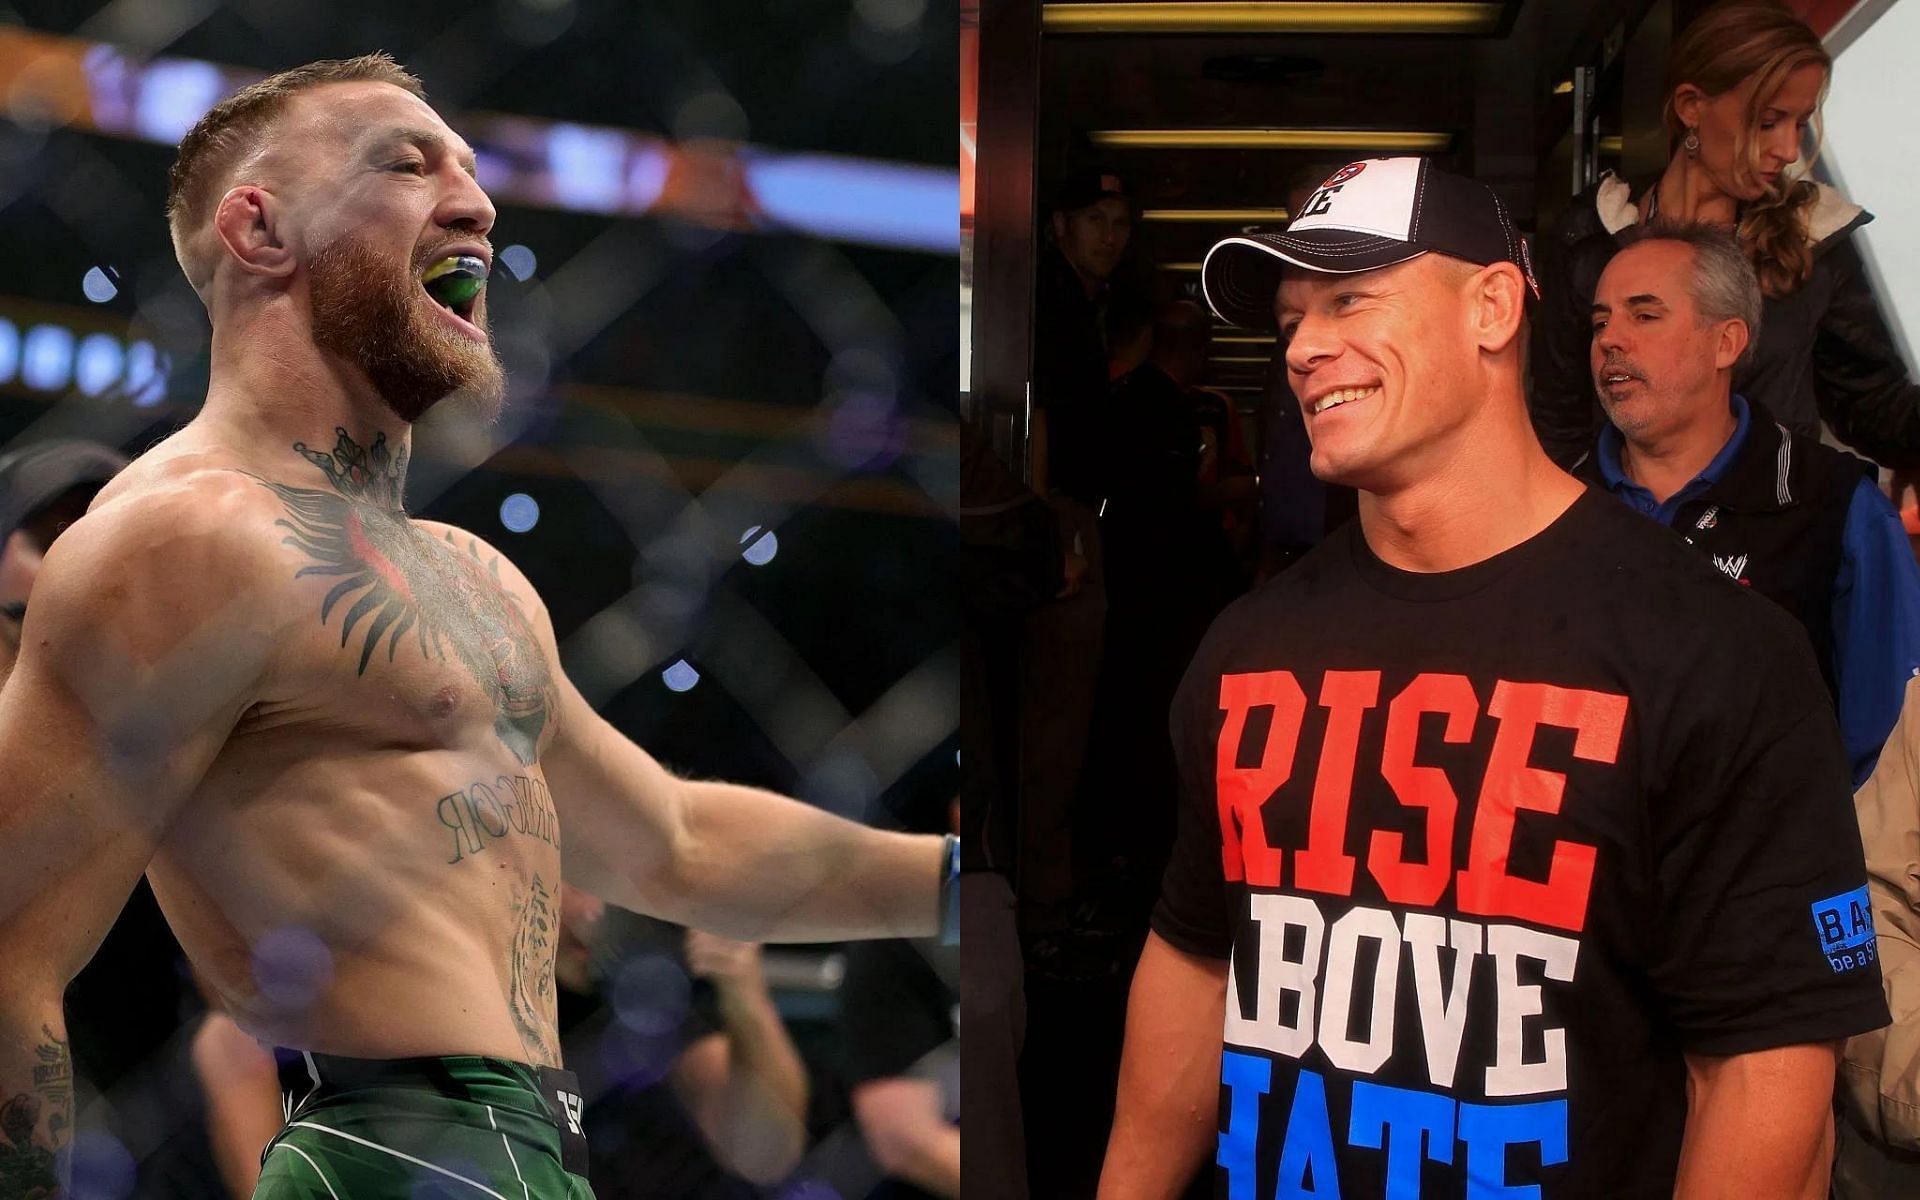 Conor McGregor (left) and John Cena (right) [Images courtesy of Getty]